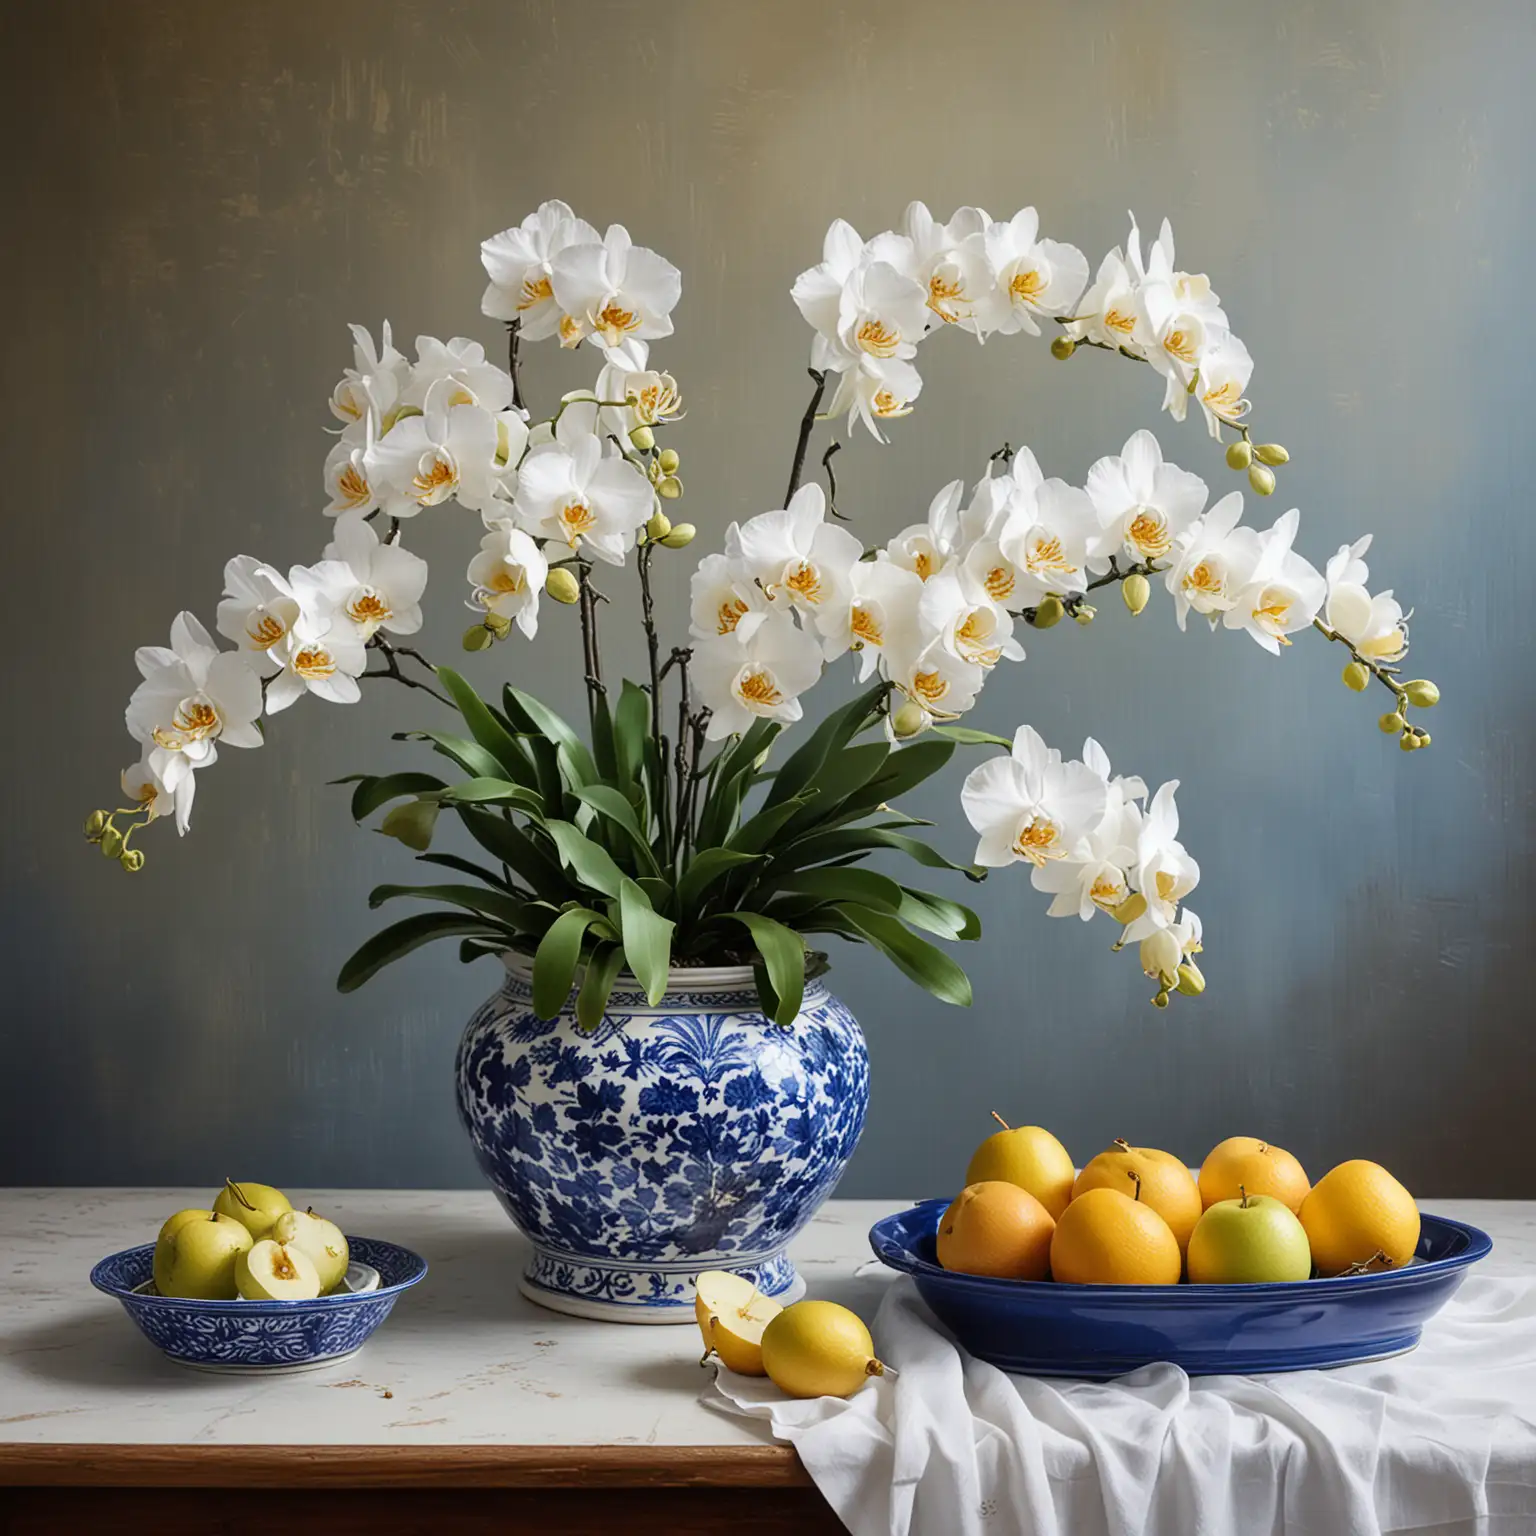 A STILL LIFE PAINTING OF WHITE ORCHIDS IN A BLUE AND WHITE PLANTER, WITH FRUIT ON THE TABLE WITH THE ORCHIDS